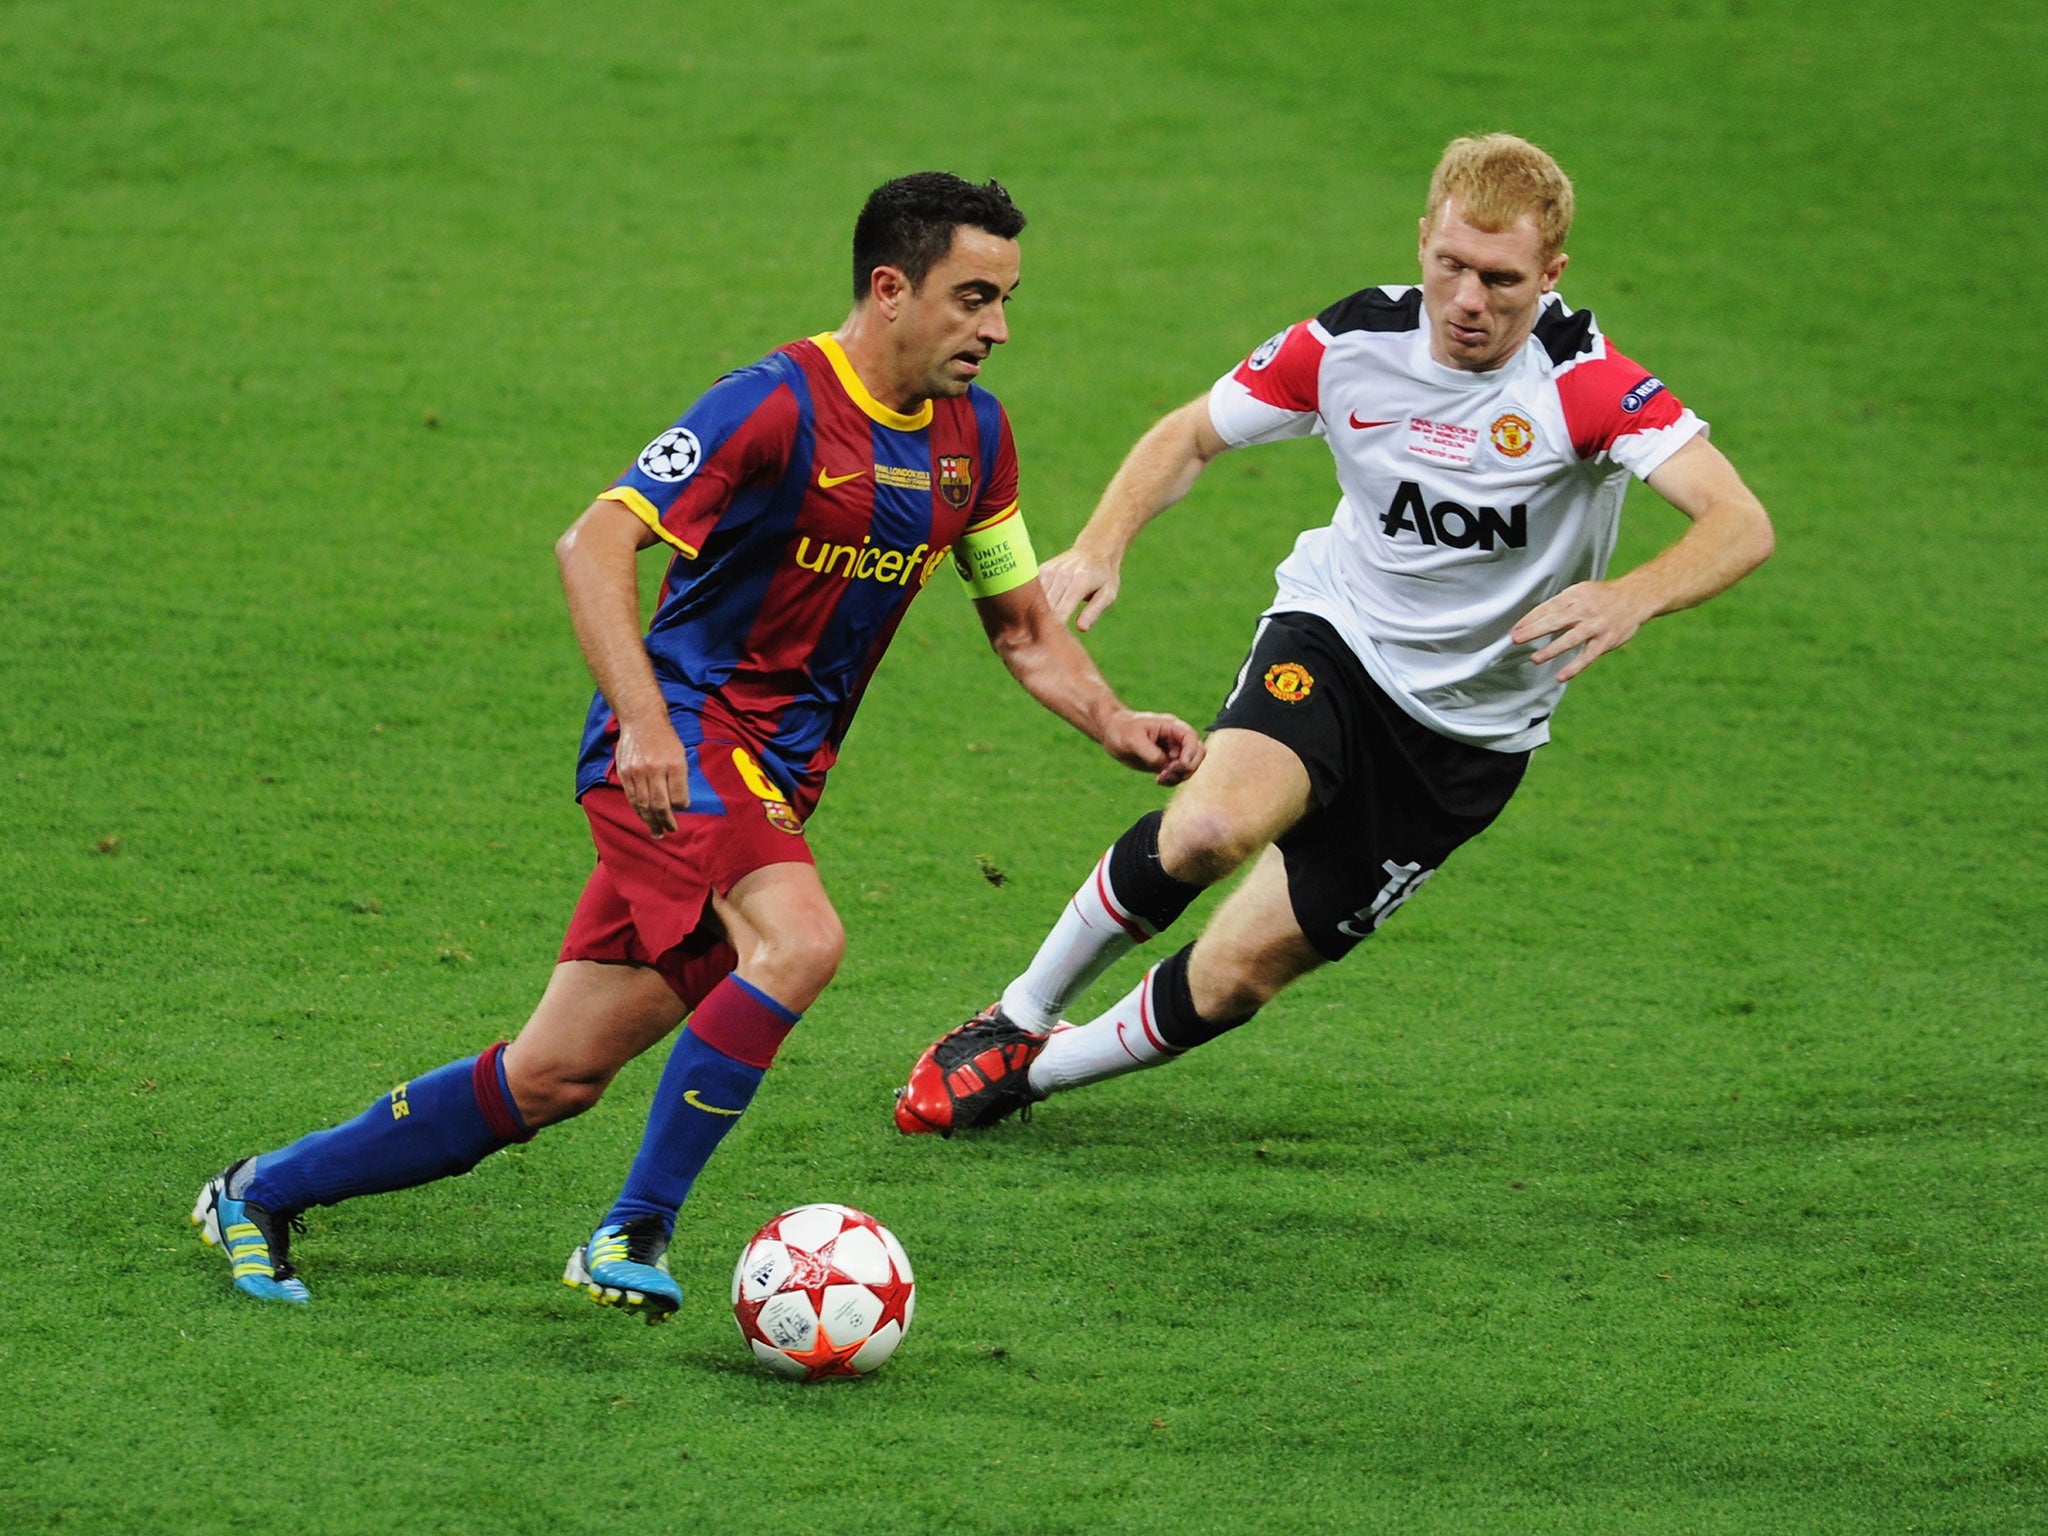 Xavi has said the 'one small regret' of his career is not playing with Paul Scholes